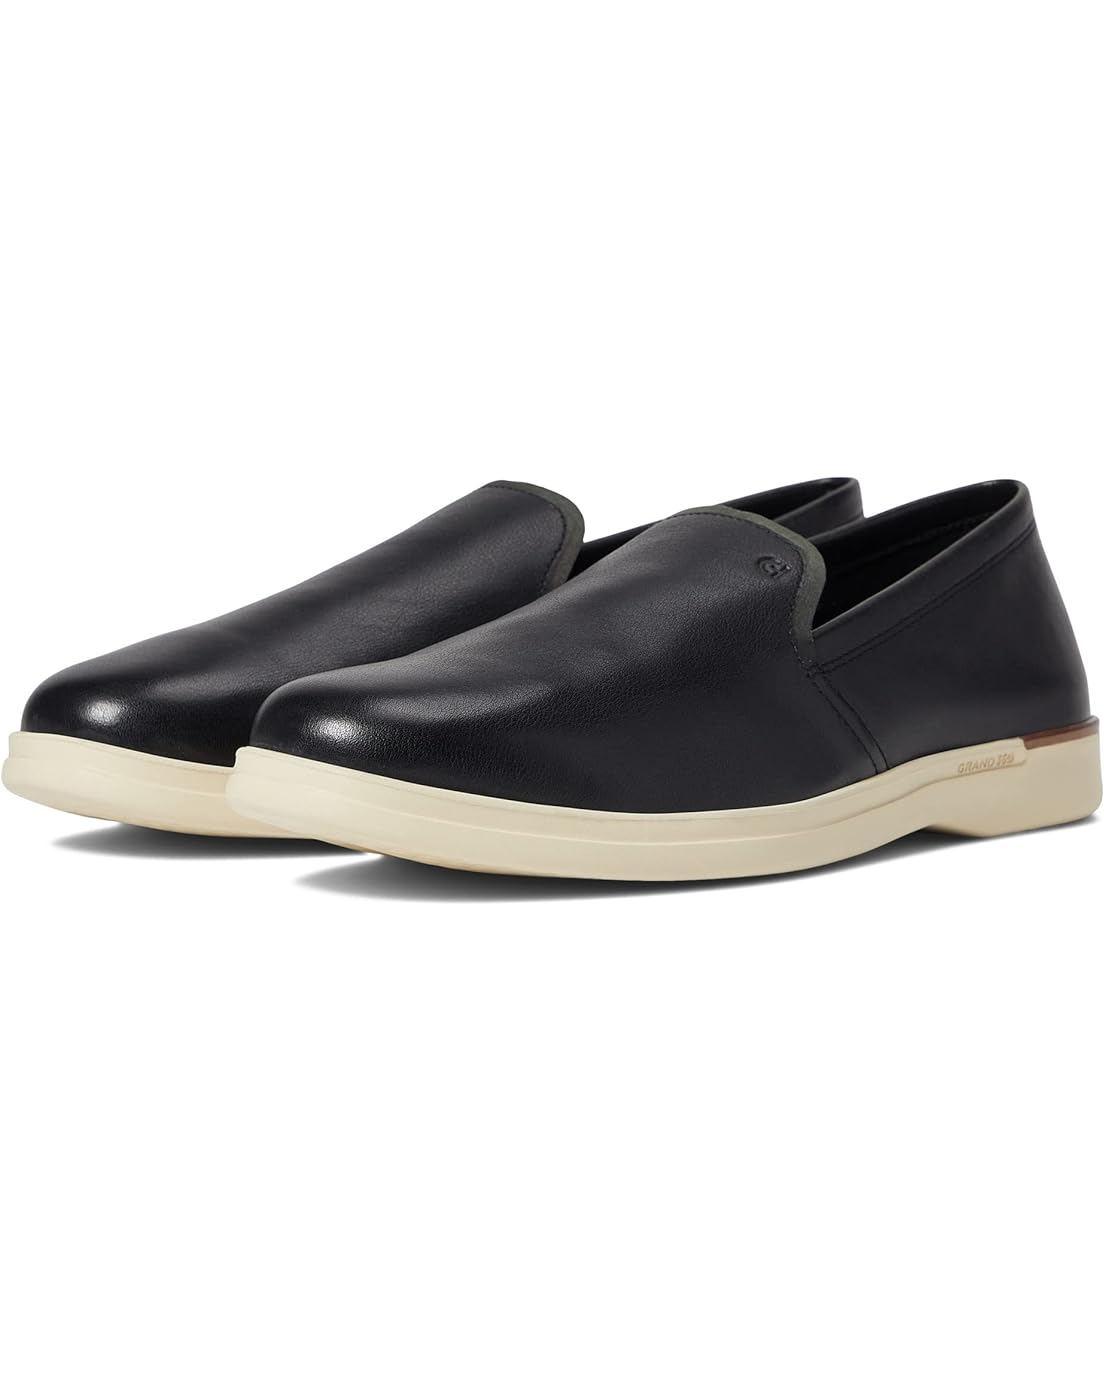 Cole Haan Grand Ambition Slip-On Loafer